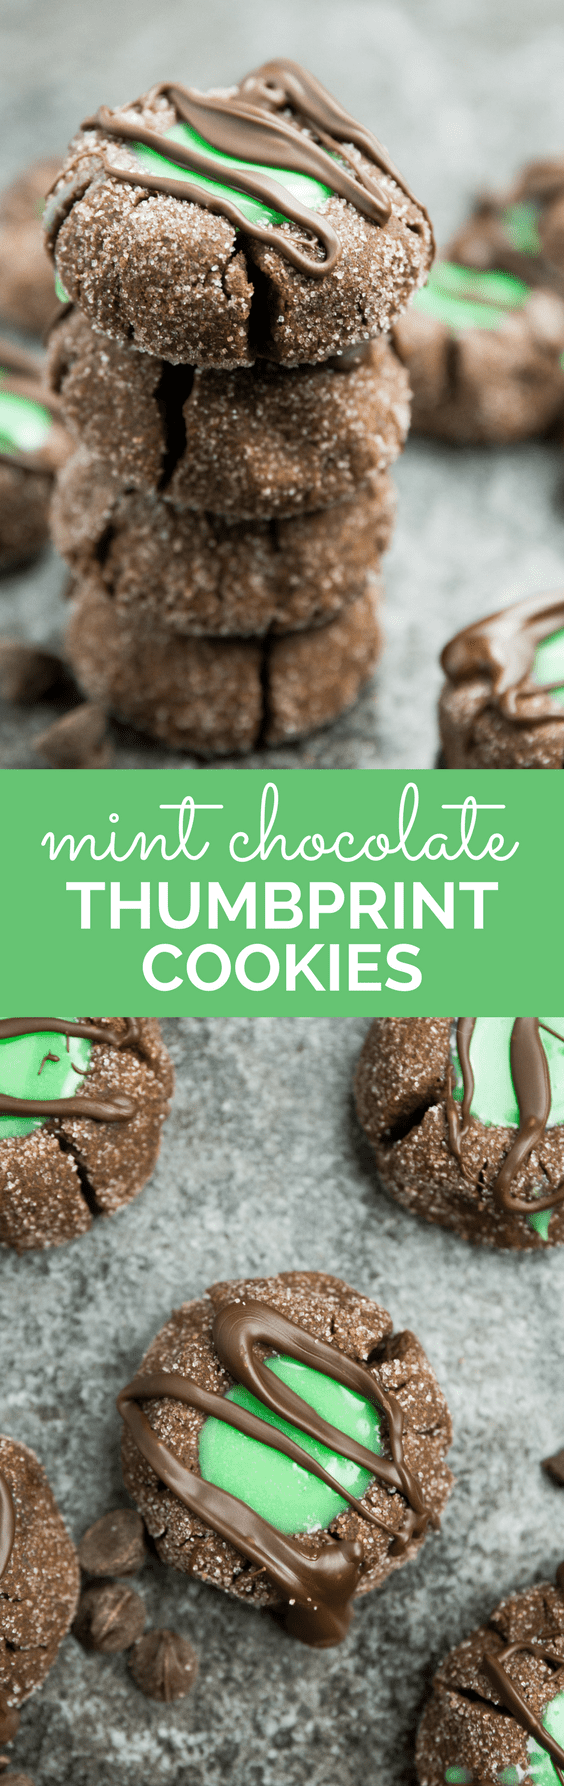 A long pin of the mint chocolate thumbprint cookies for Pinterest.